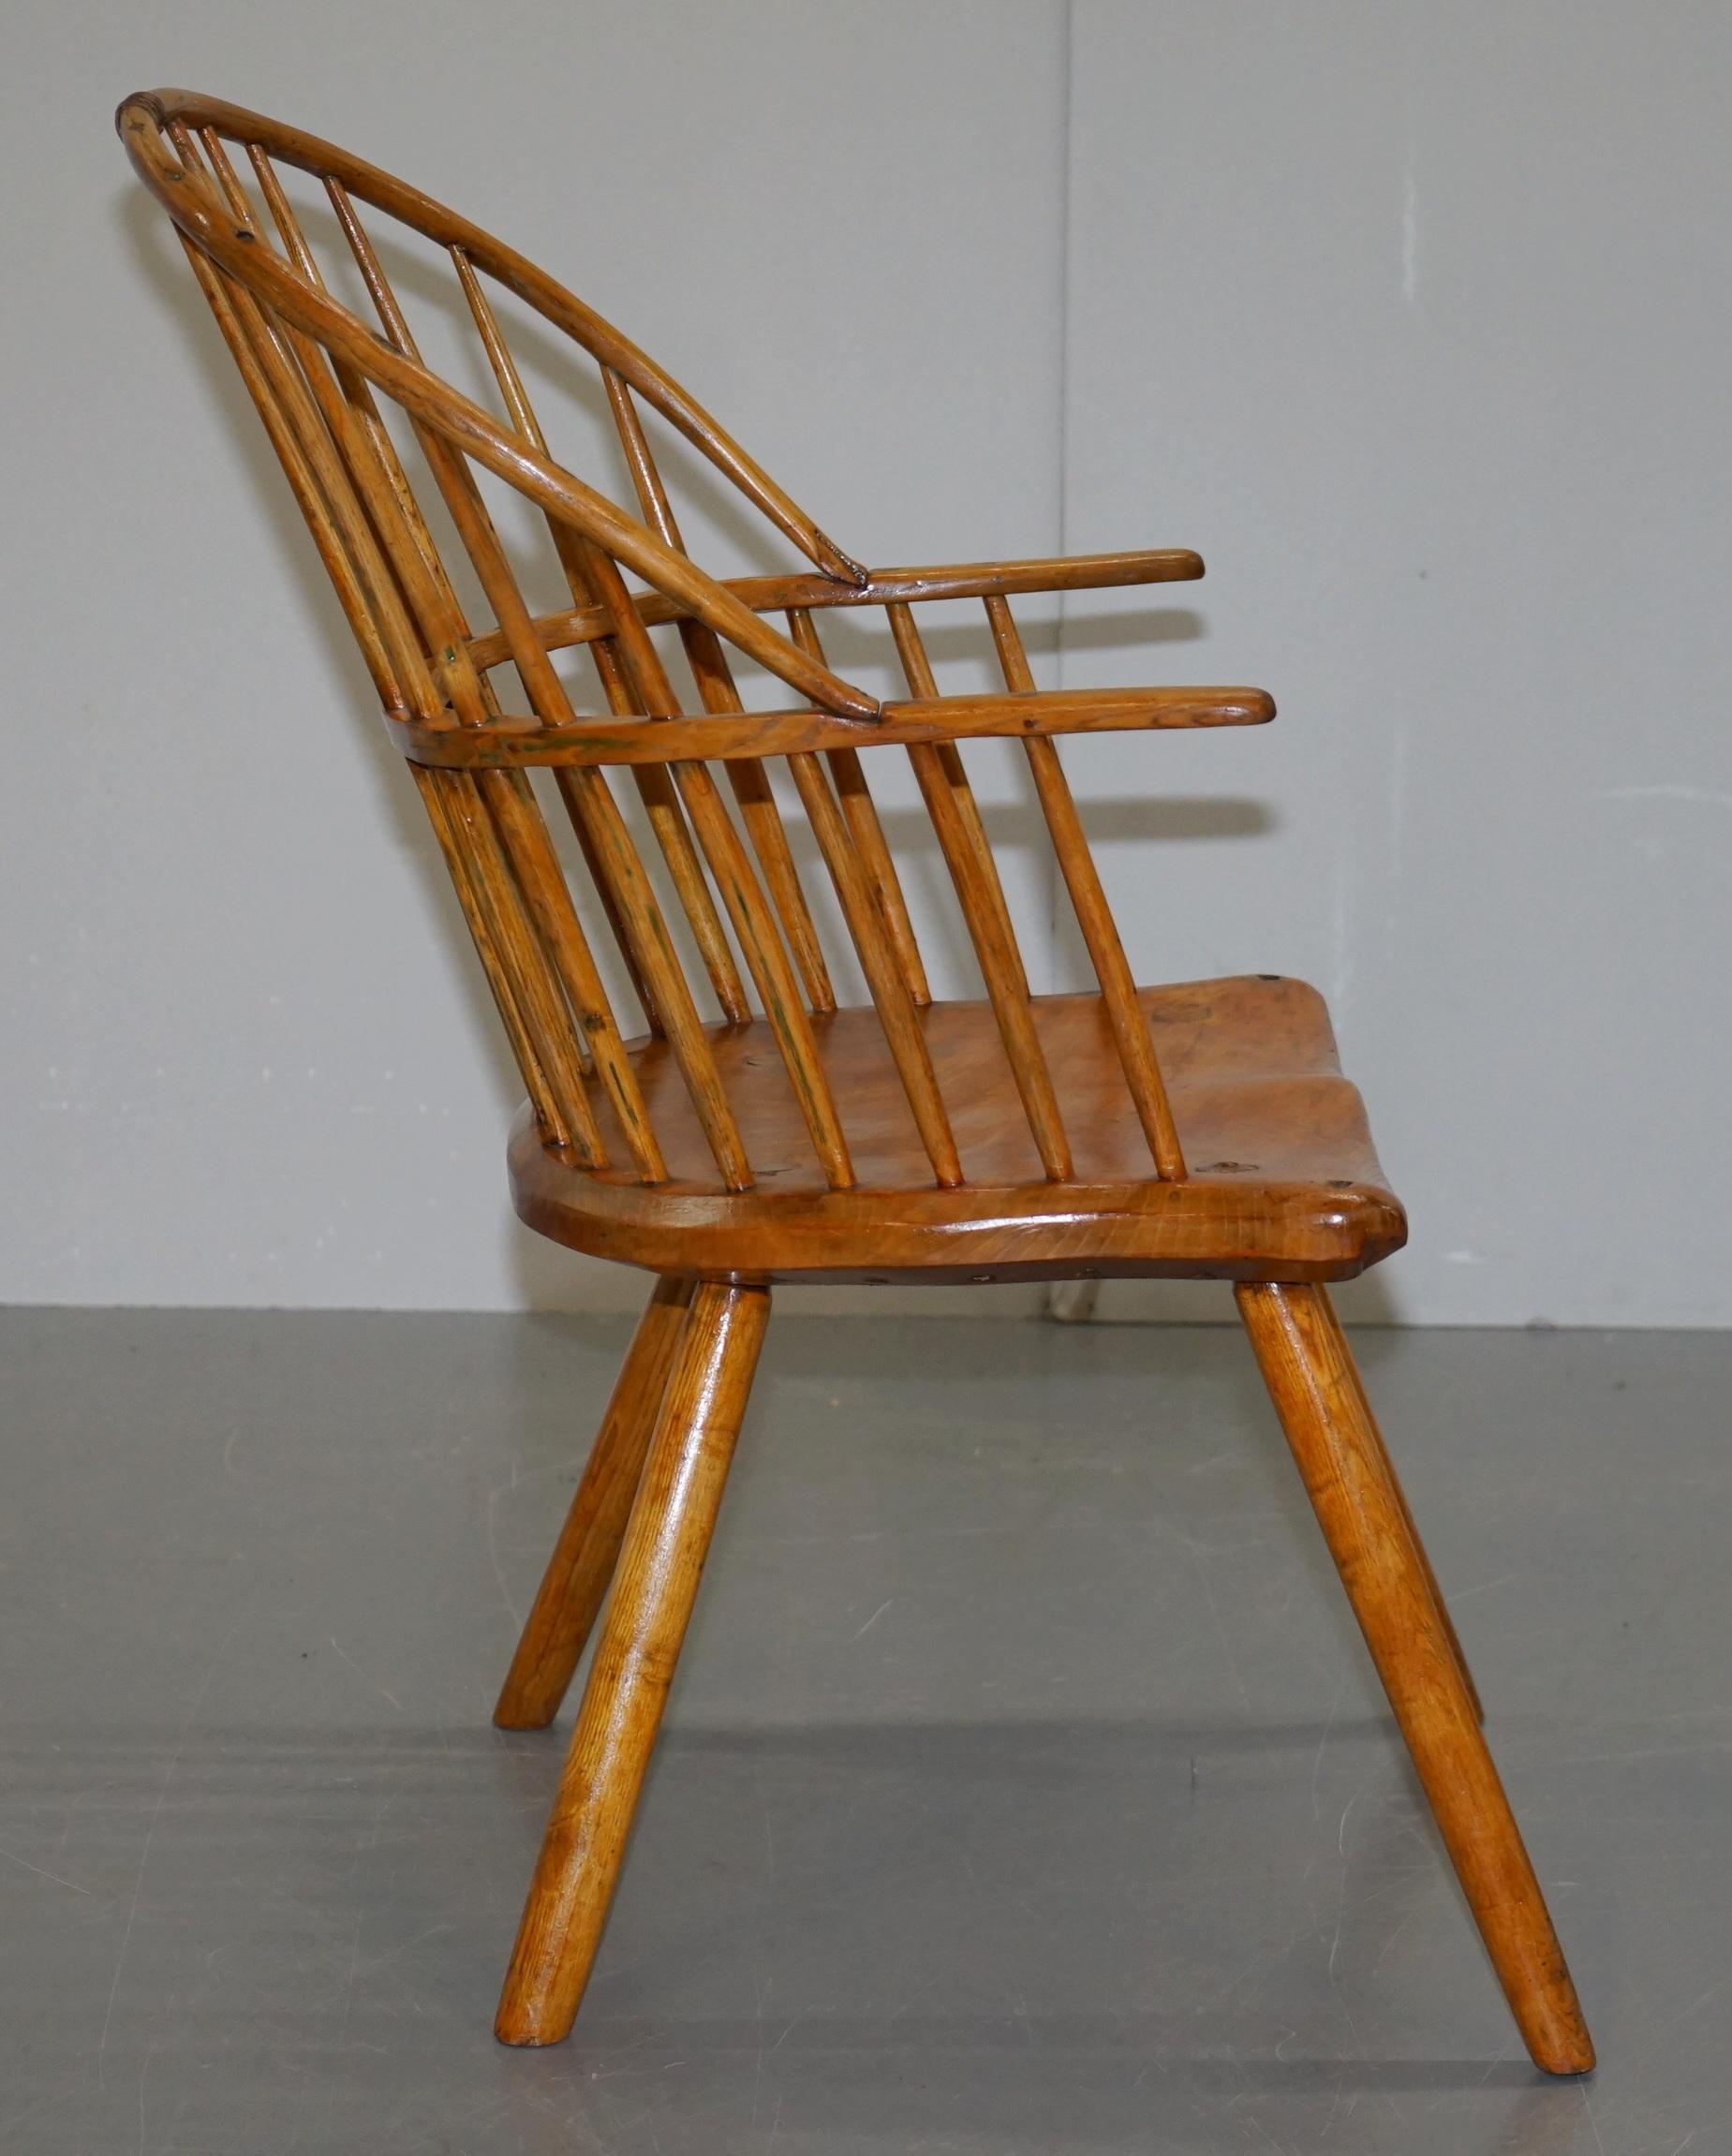 Stunning 18th Century Yew Wood Windsor Armchair Primate Design Stick Back For Sale 4